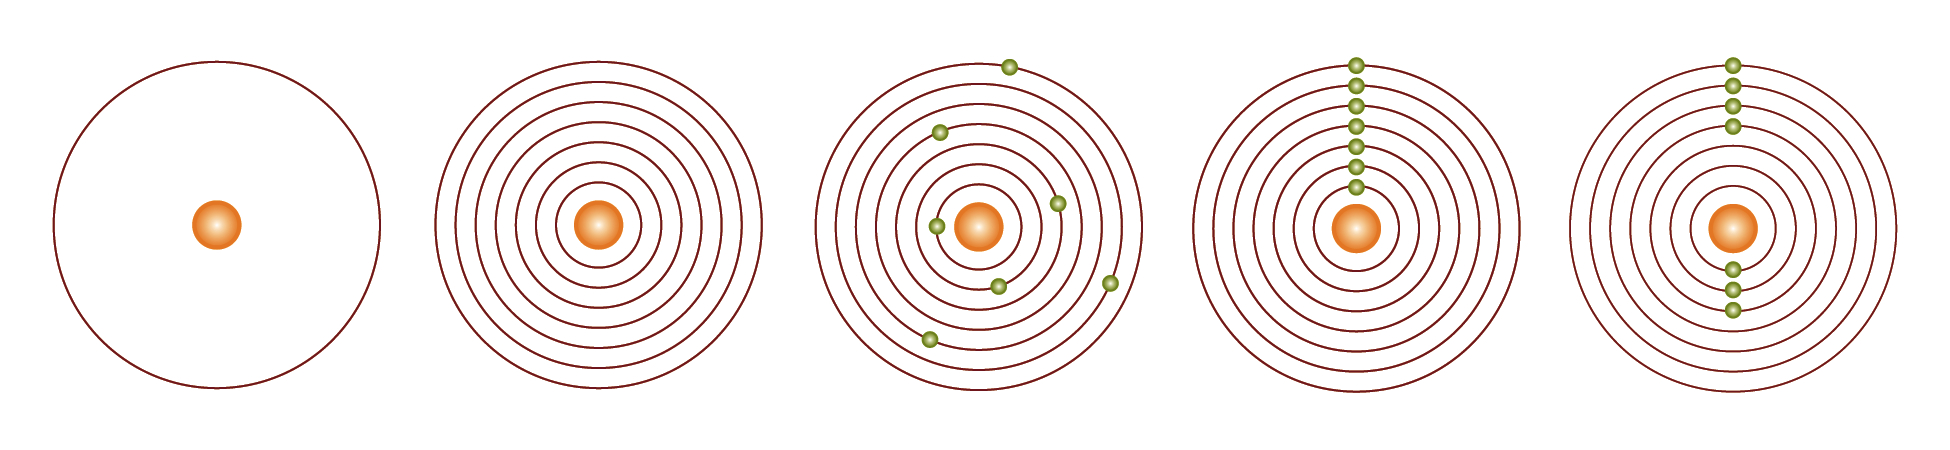 Five sample solar system droplets with orbiting objects in different
                     locations.